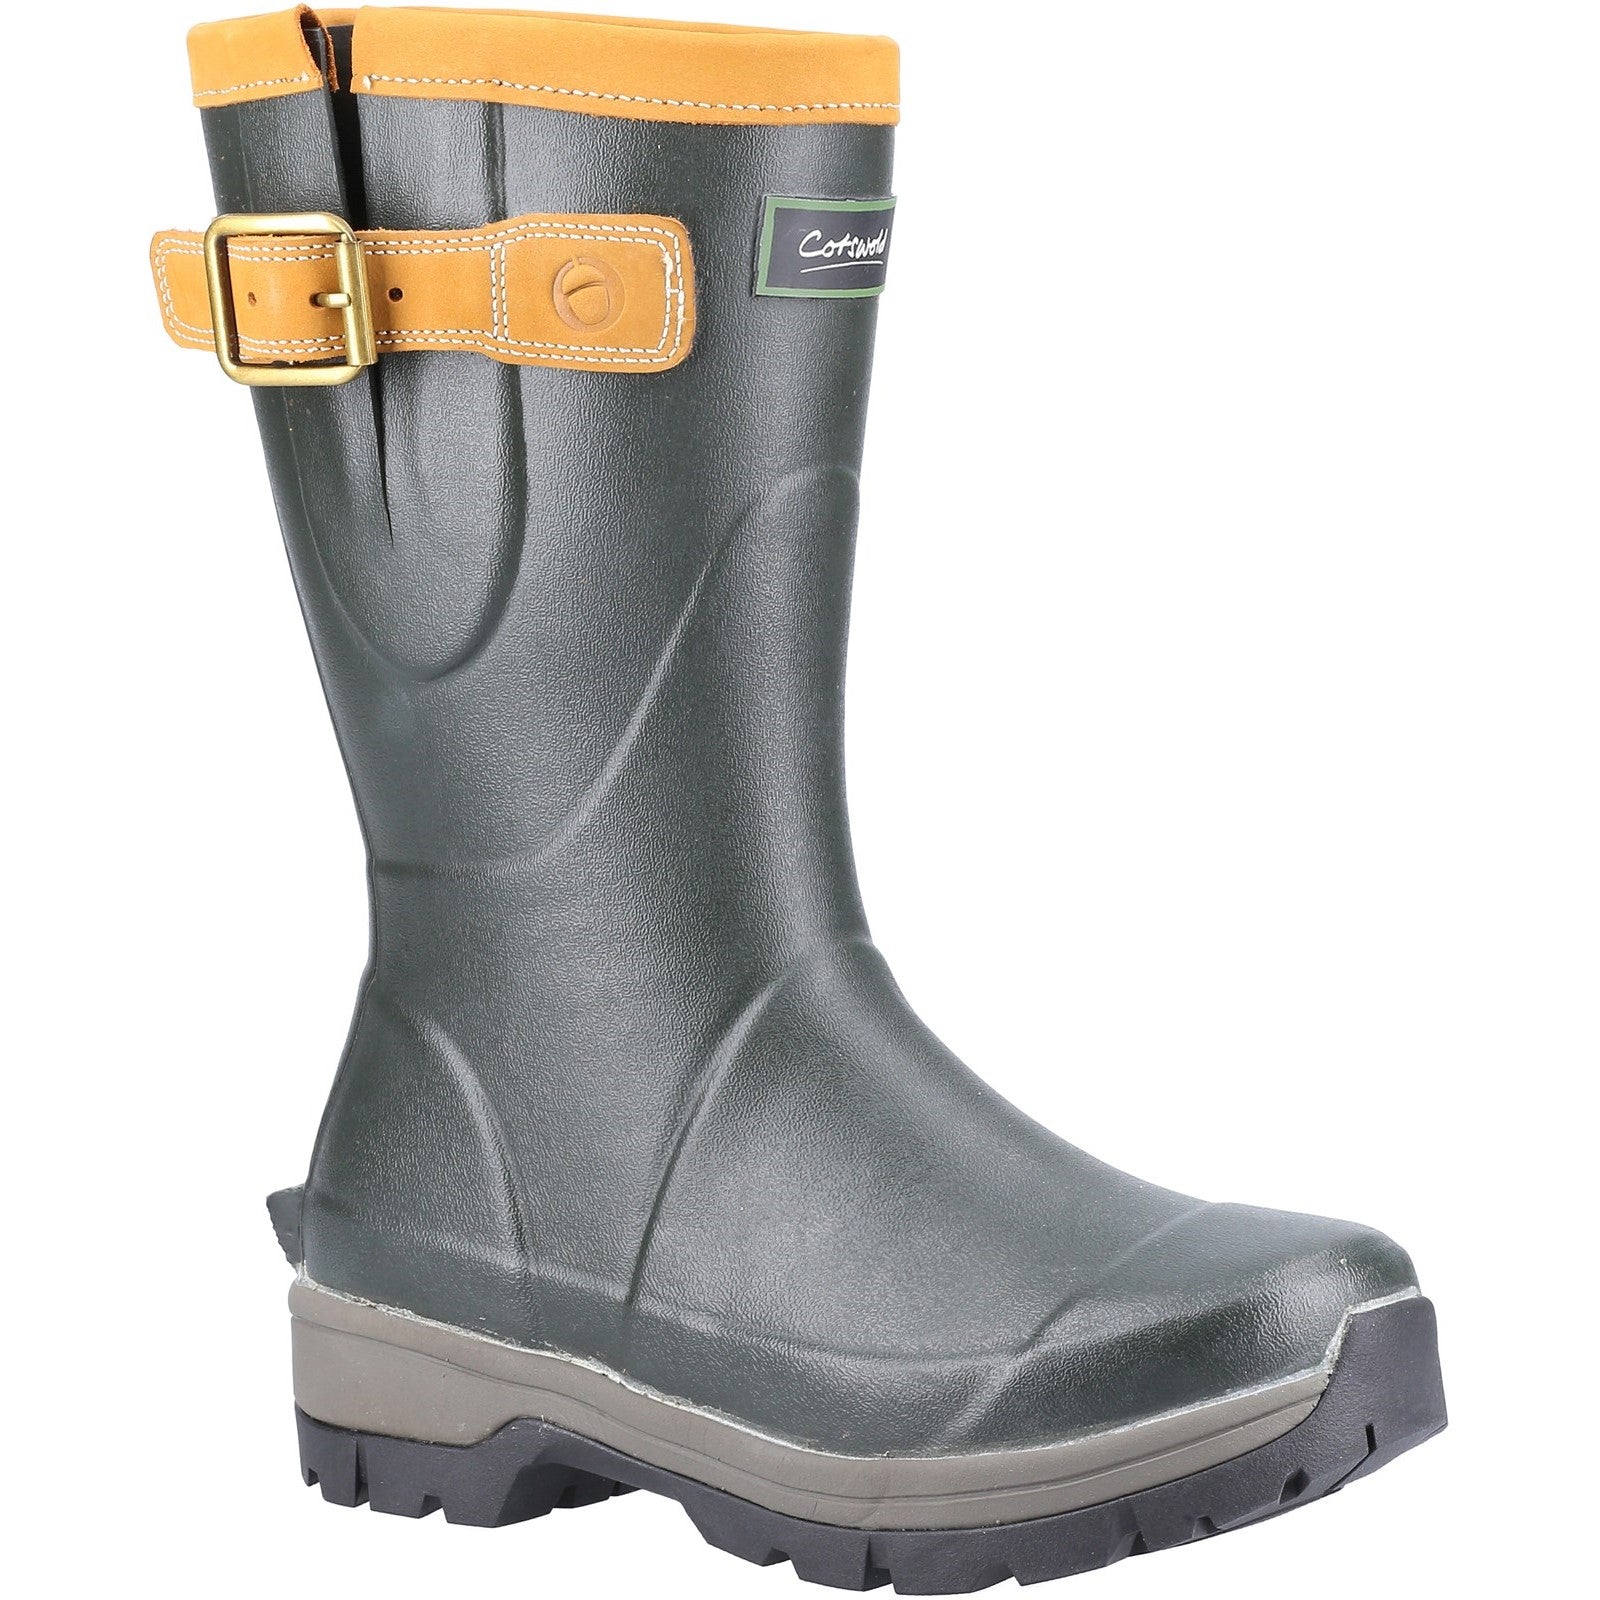 Stratus Short Boot, Cotswold